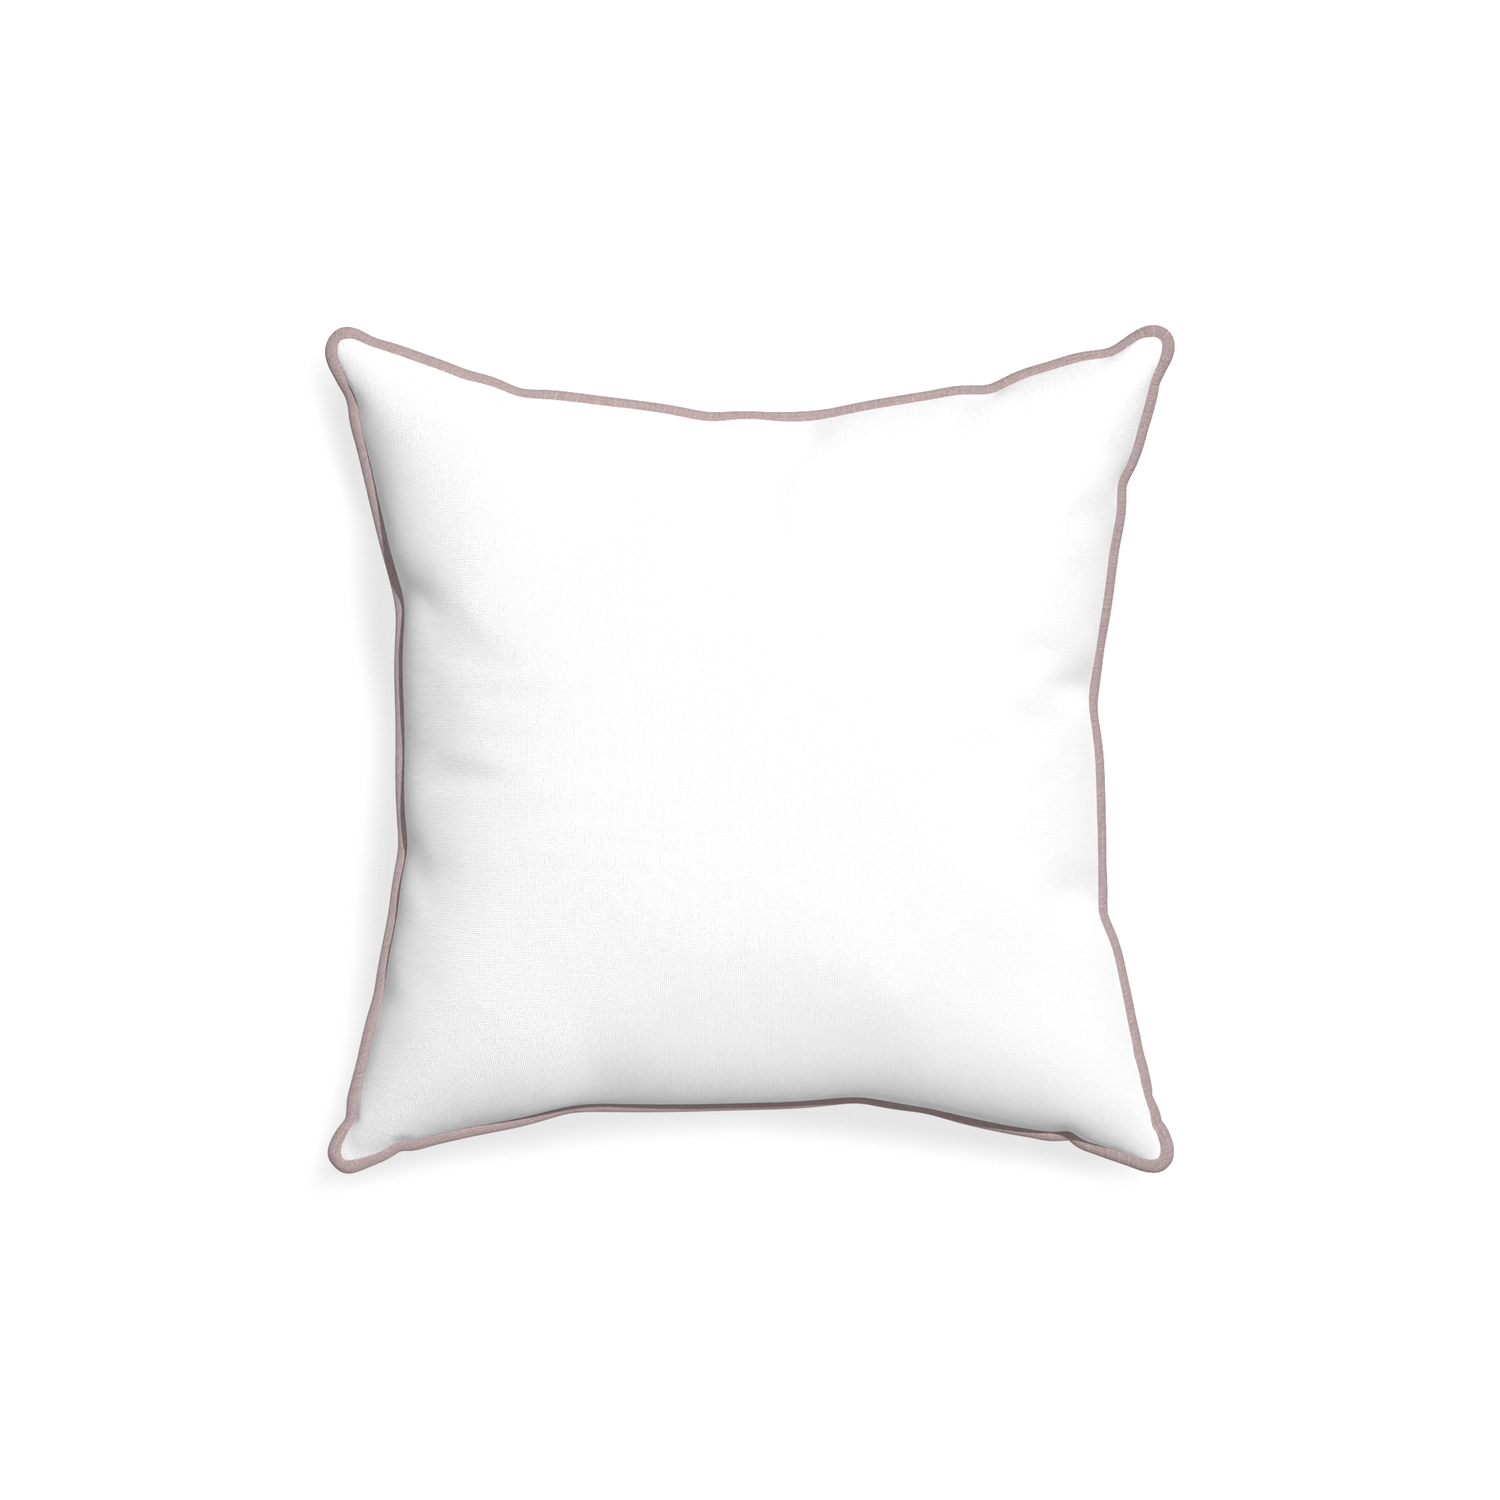 18-square snow custom white cottonpillow with orchid piping on white background